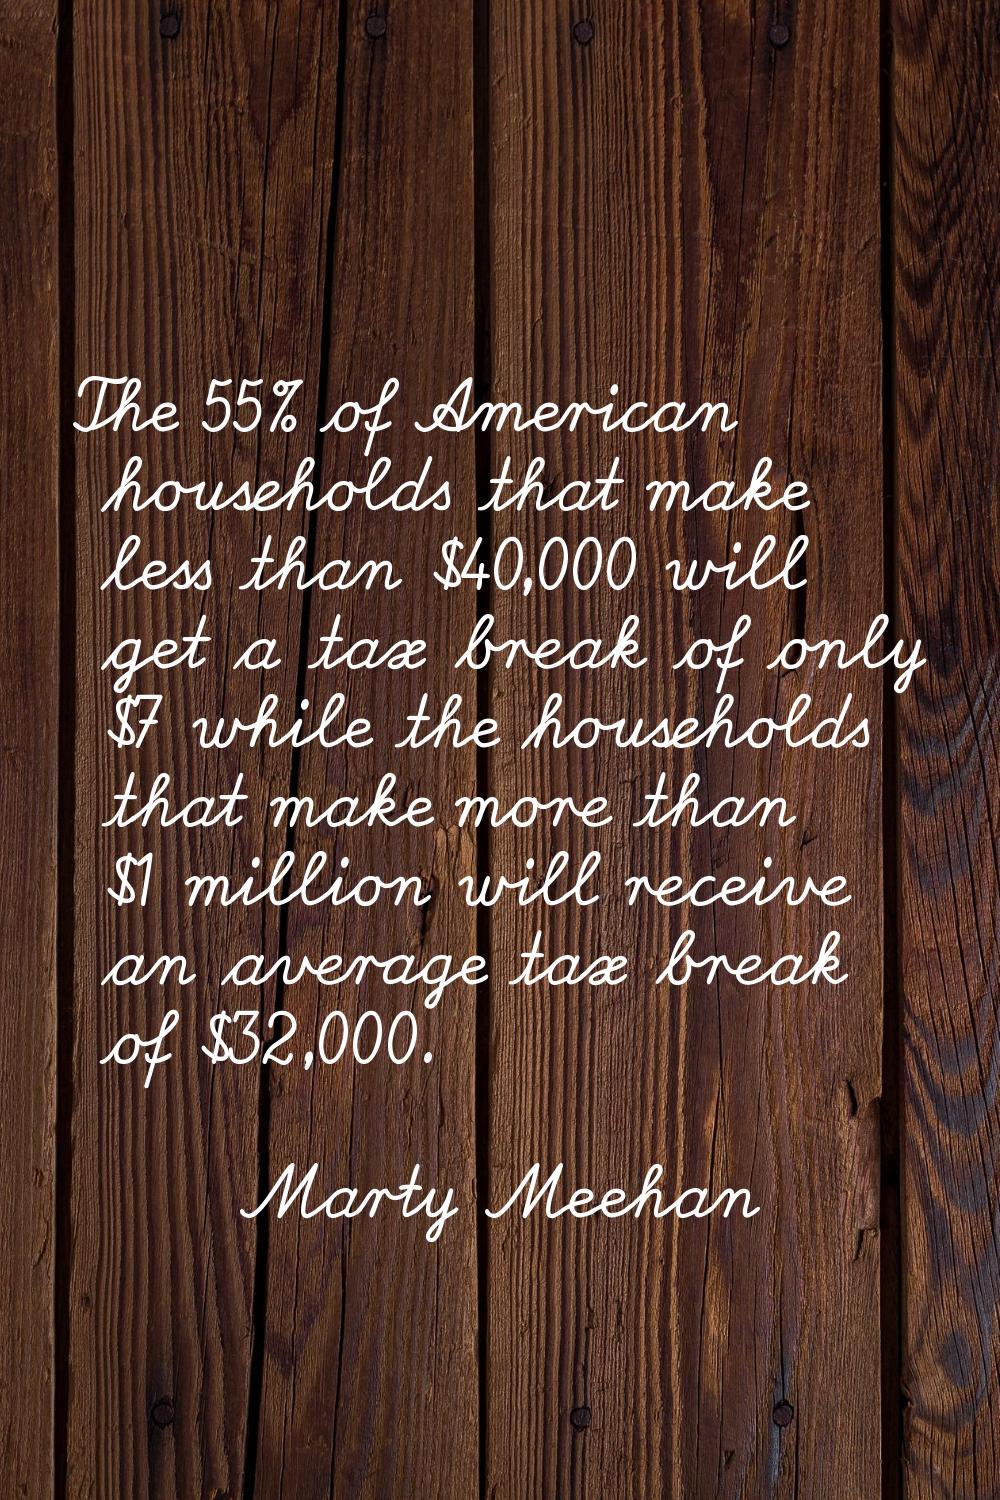 The 55% of American households that make less than $40,000 will get a tax break of only $7 while th